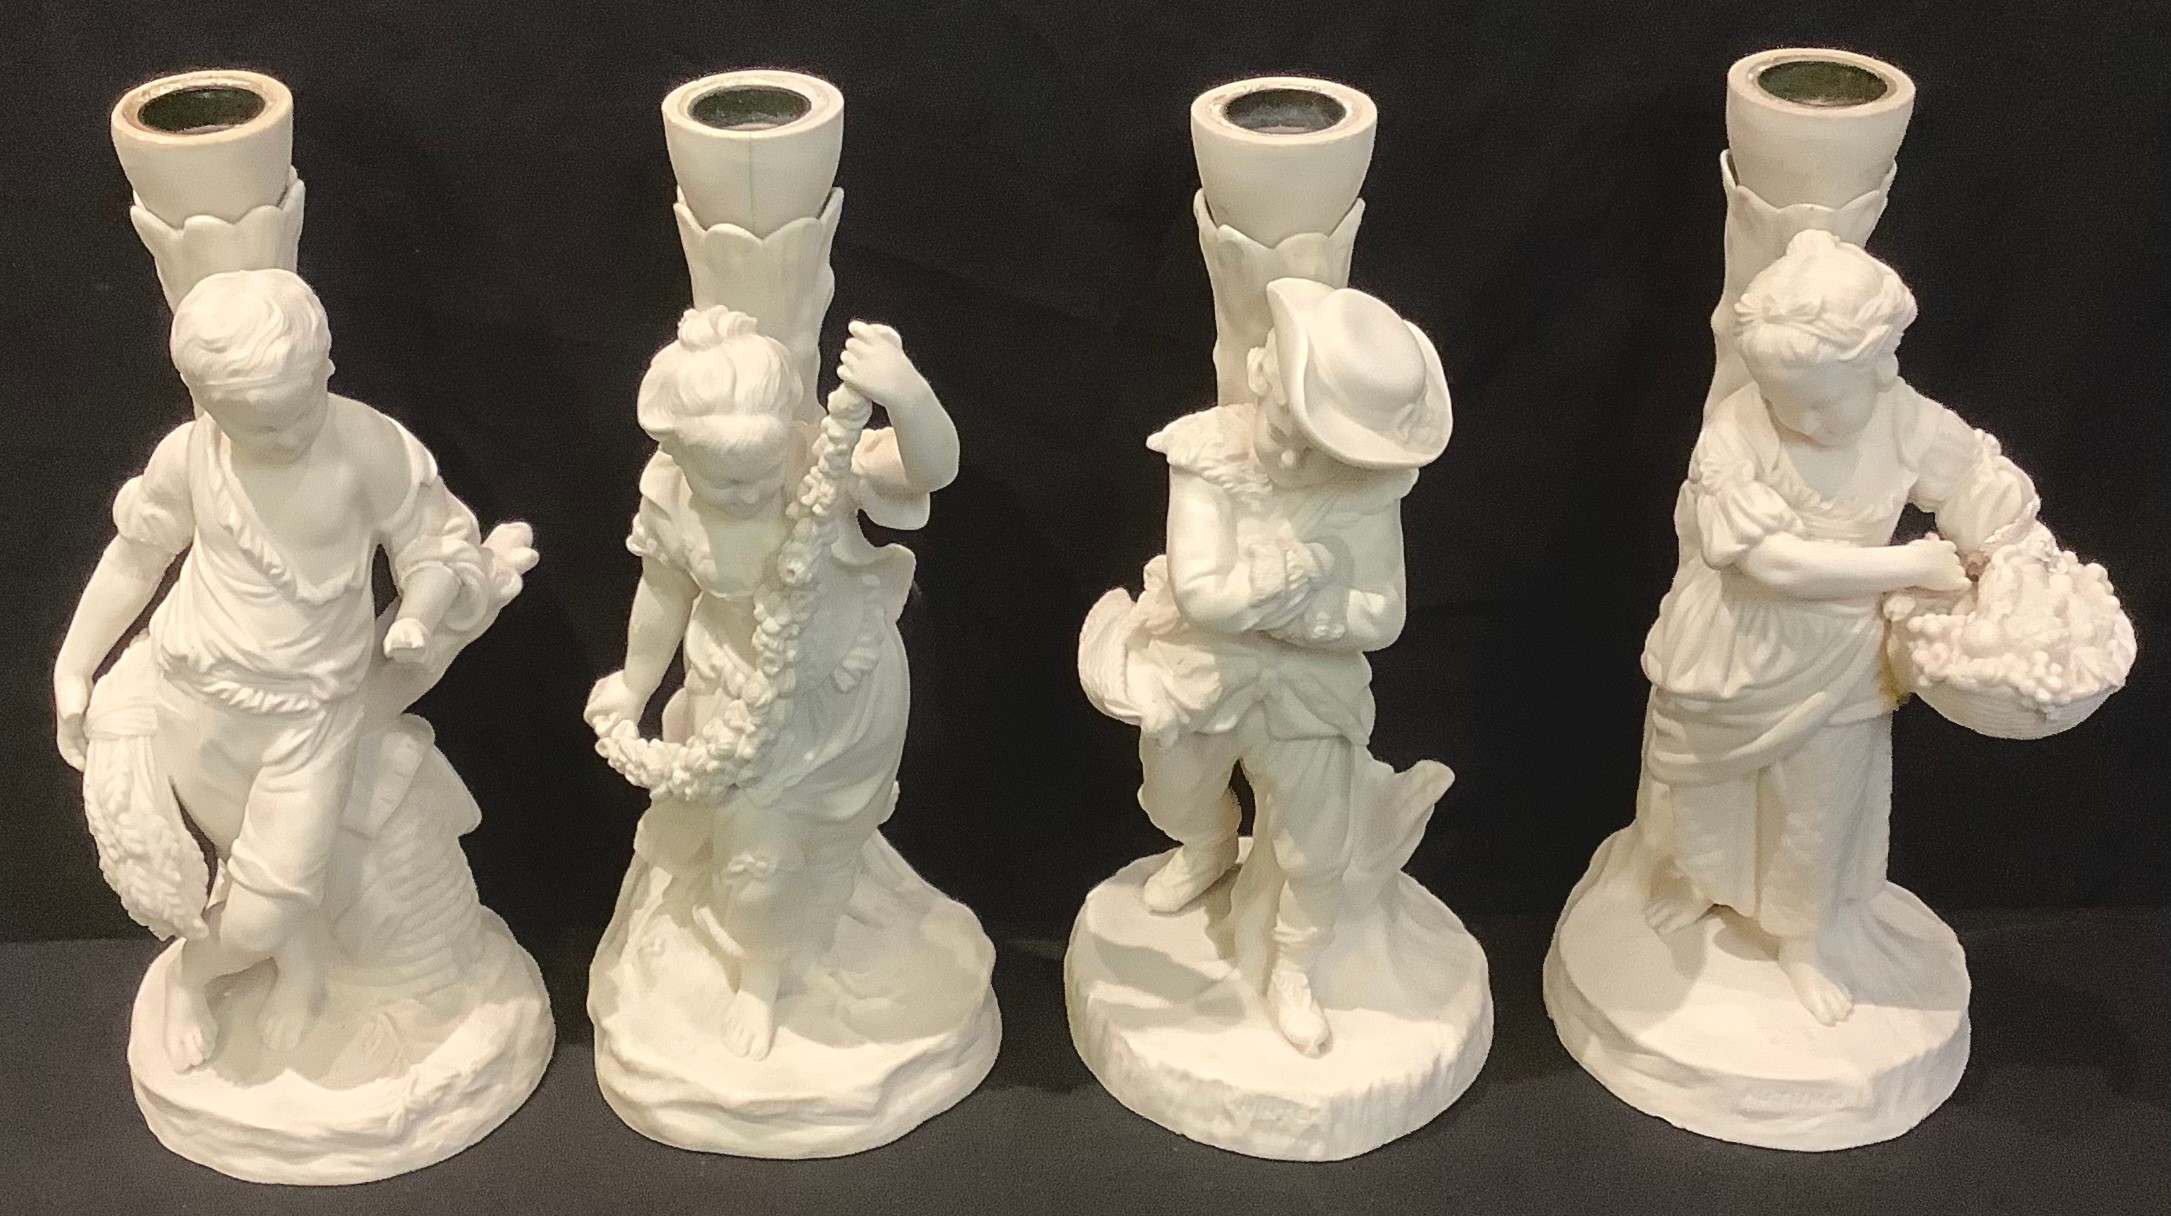 A set of four Victorian Copeland Parian figural candlesticks, The Four Seasons (lacking branches)